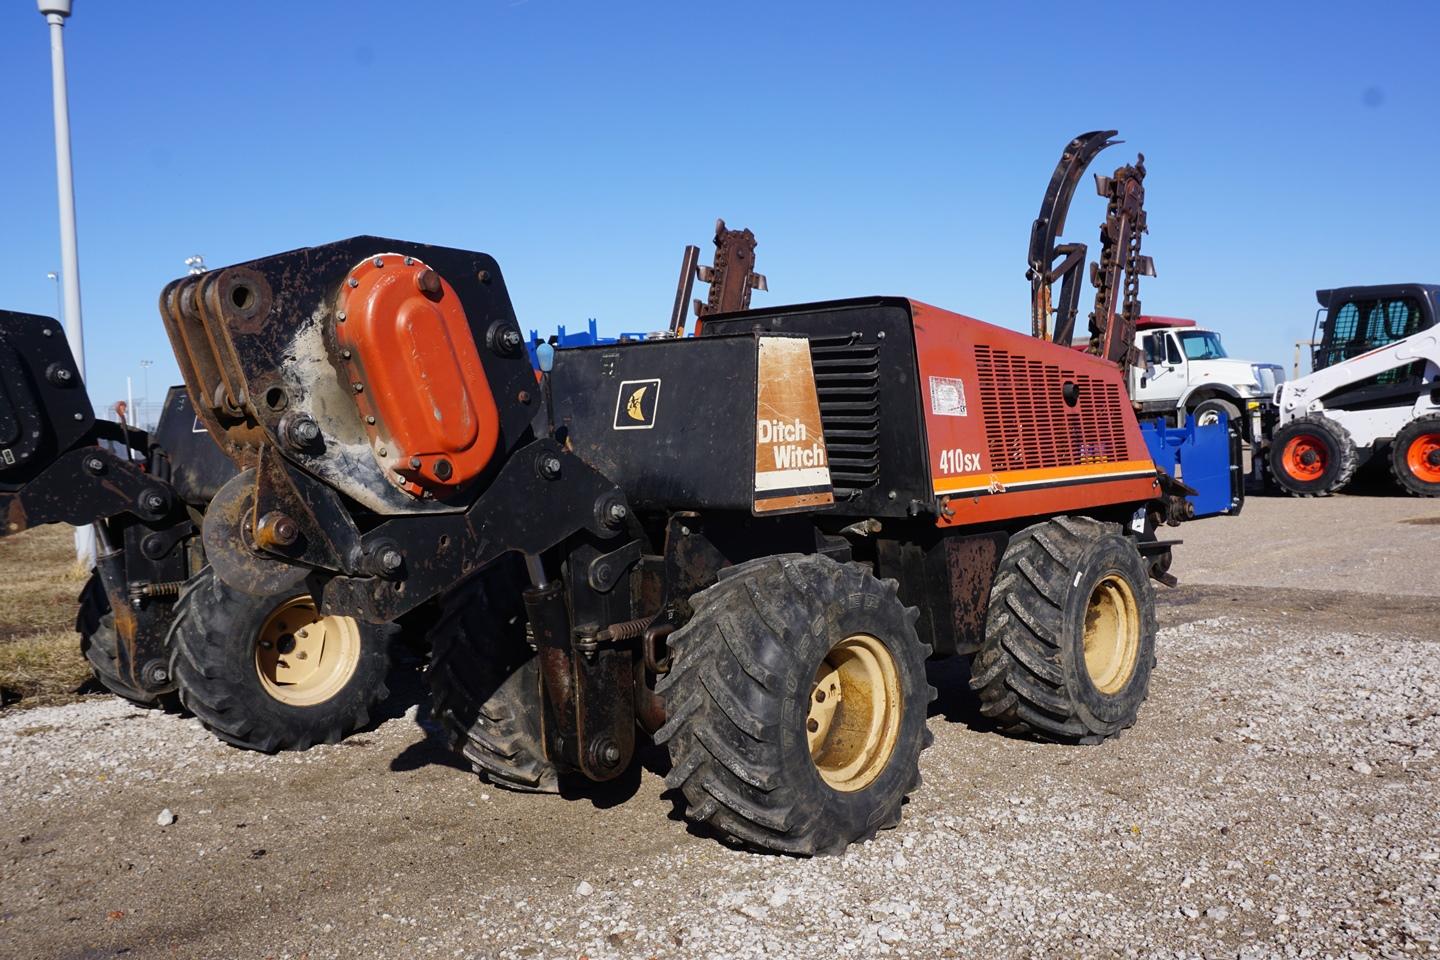 Ditch Witch Model 410 SX Walk Behind Trencher & Vibratory Plow Combo Unit, SN#4P0612, 1,756 Hours, L